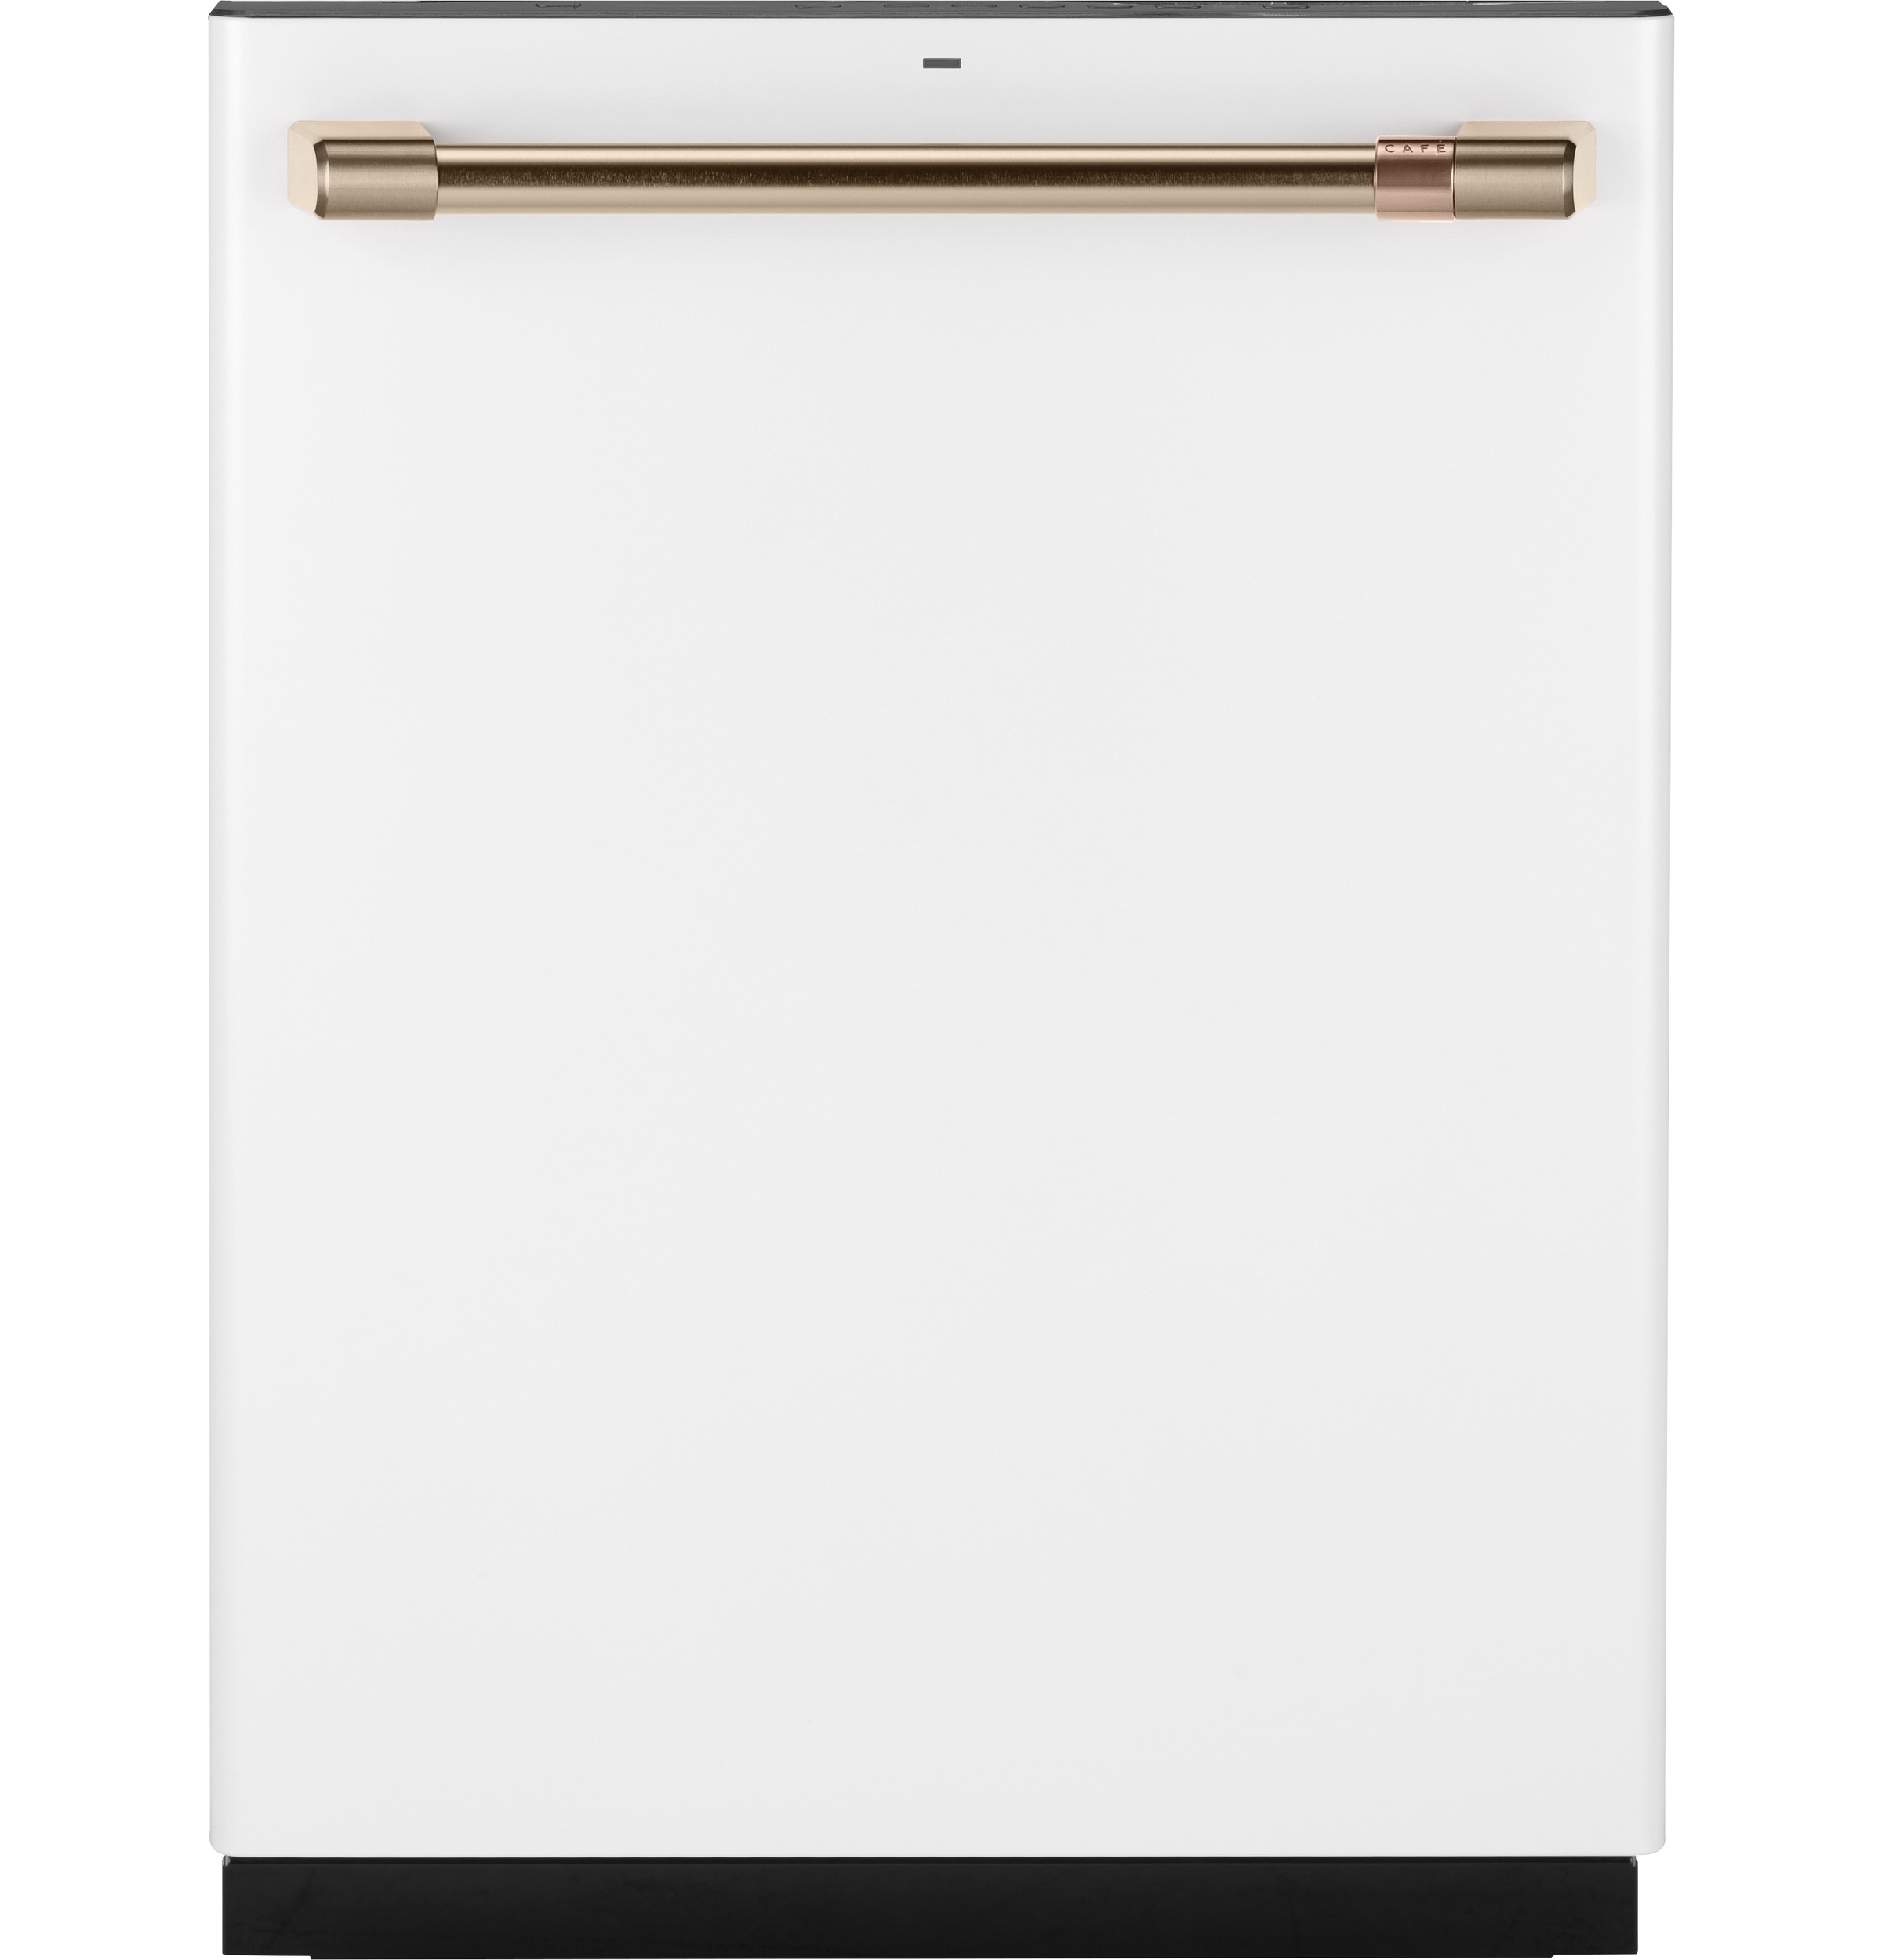 Café™ Stainless Interior Built-In Dishwasher with Hidden Controls